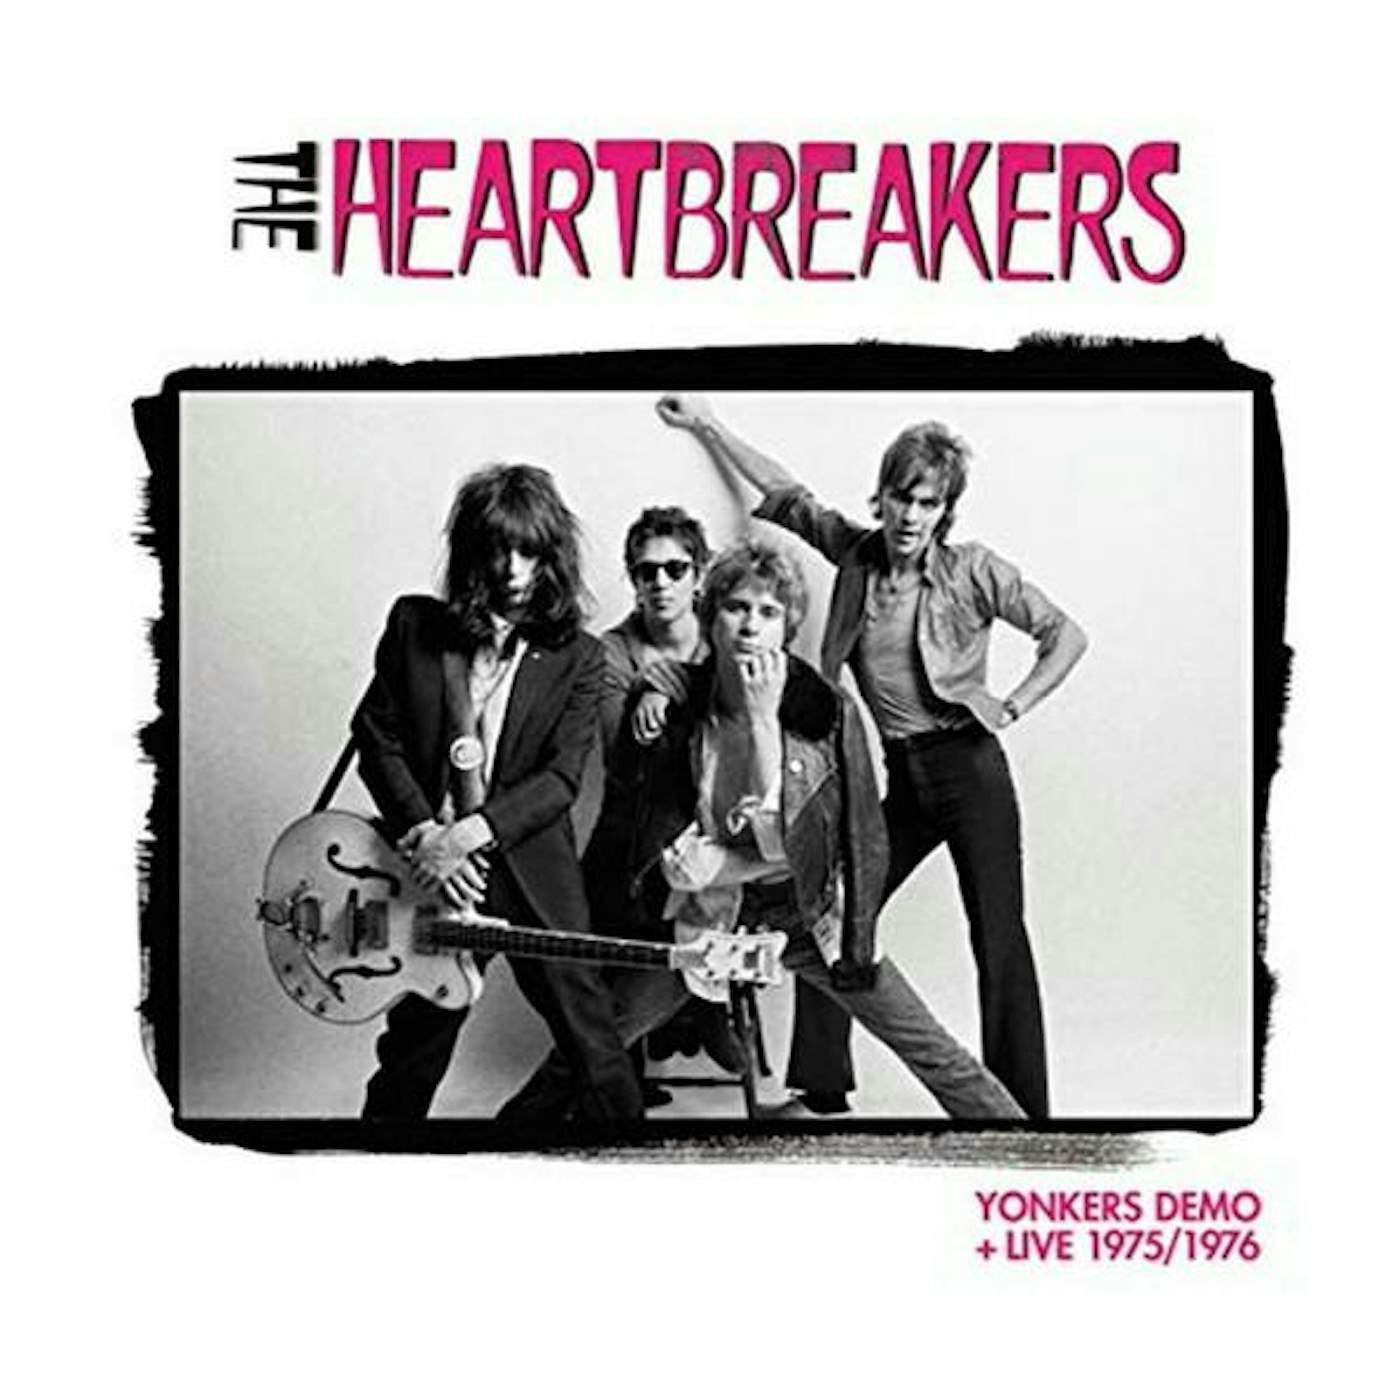 Johnny Thunders & The Heartbreakers YONKERS DEMO/LIVE 1975-1976 CD